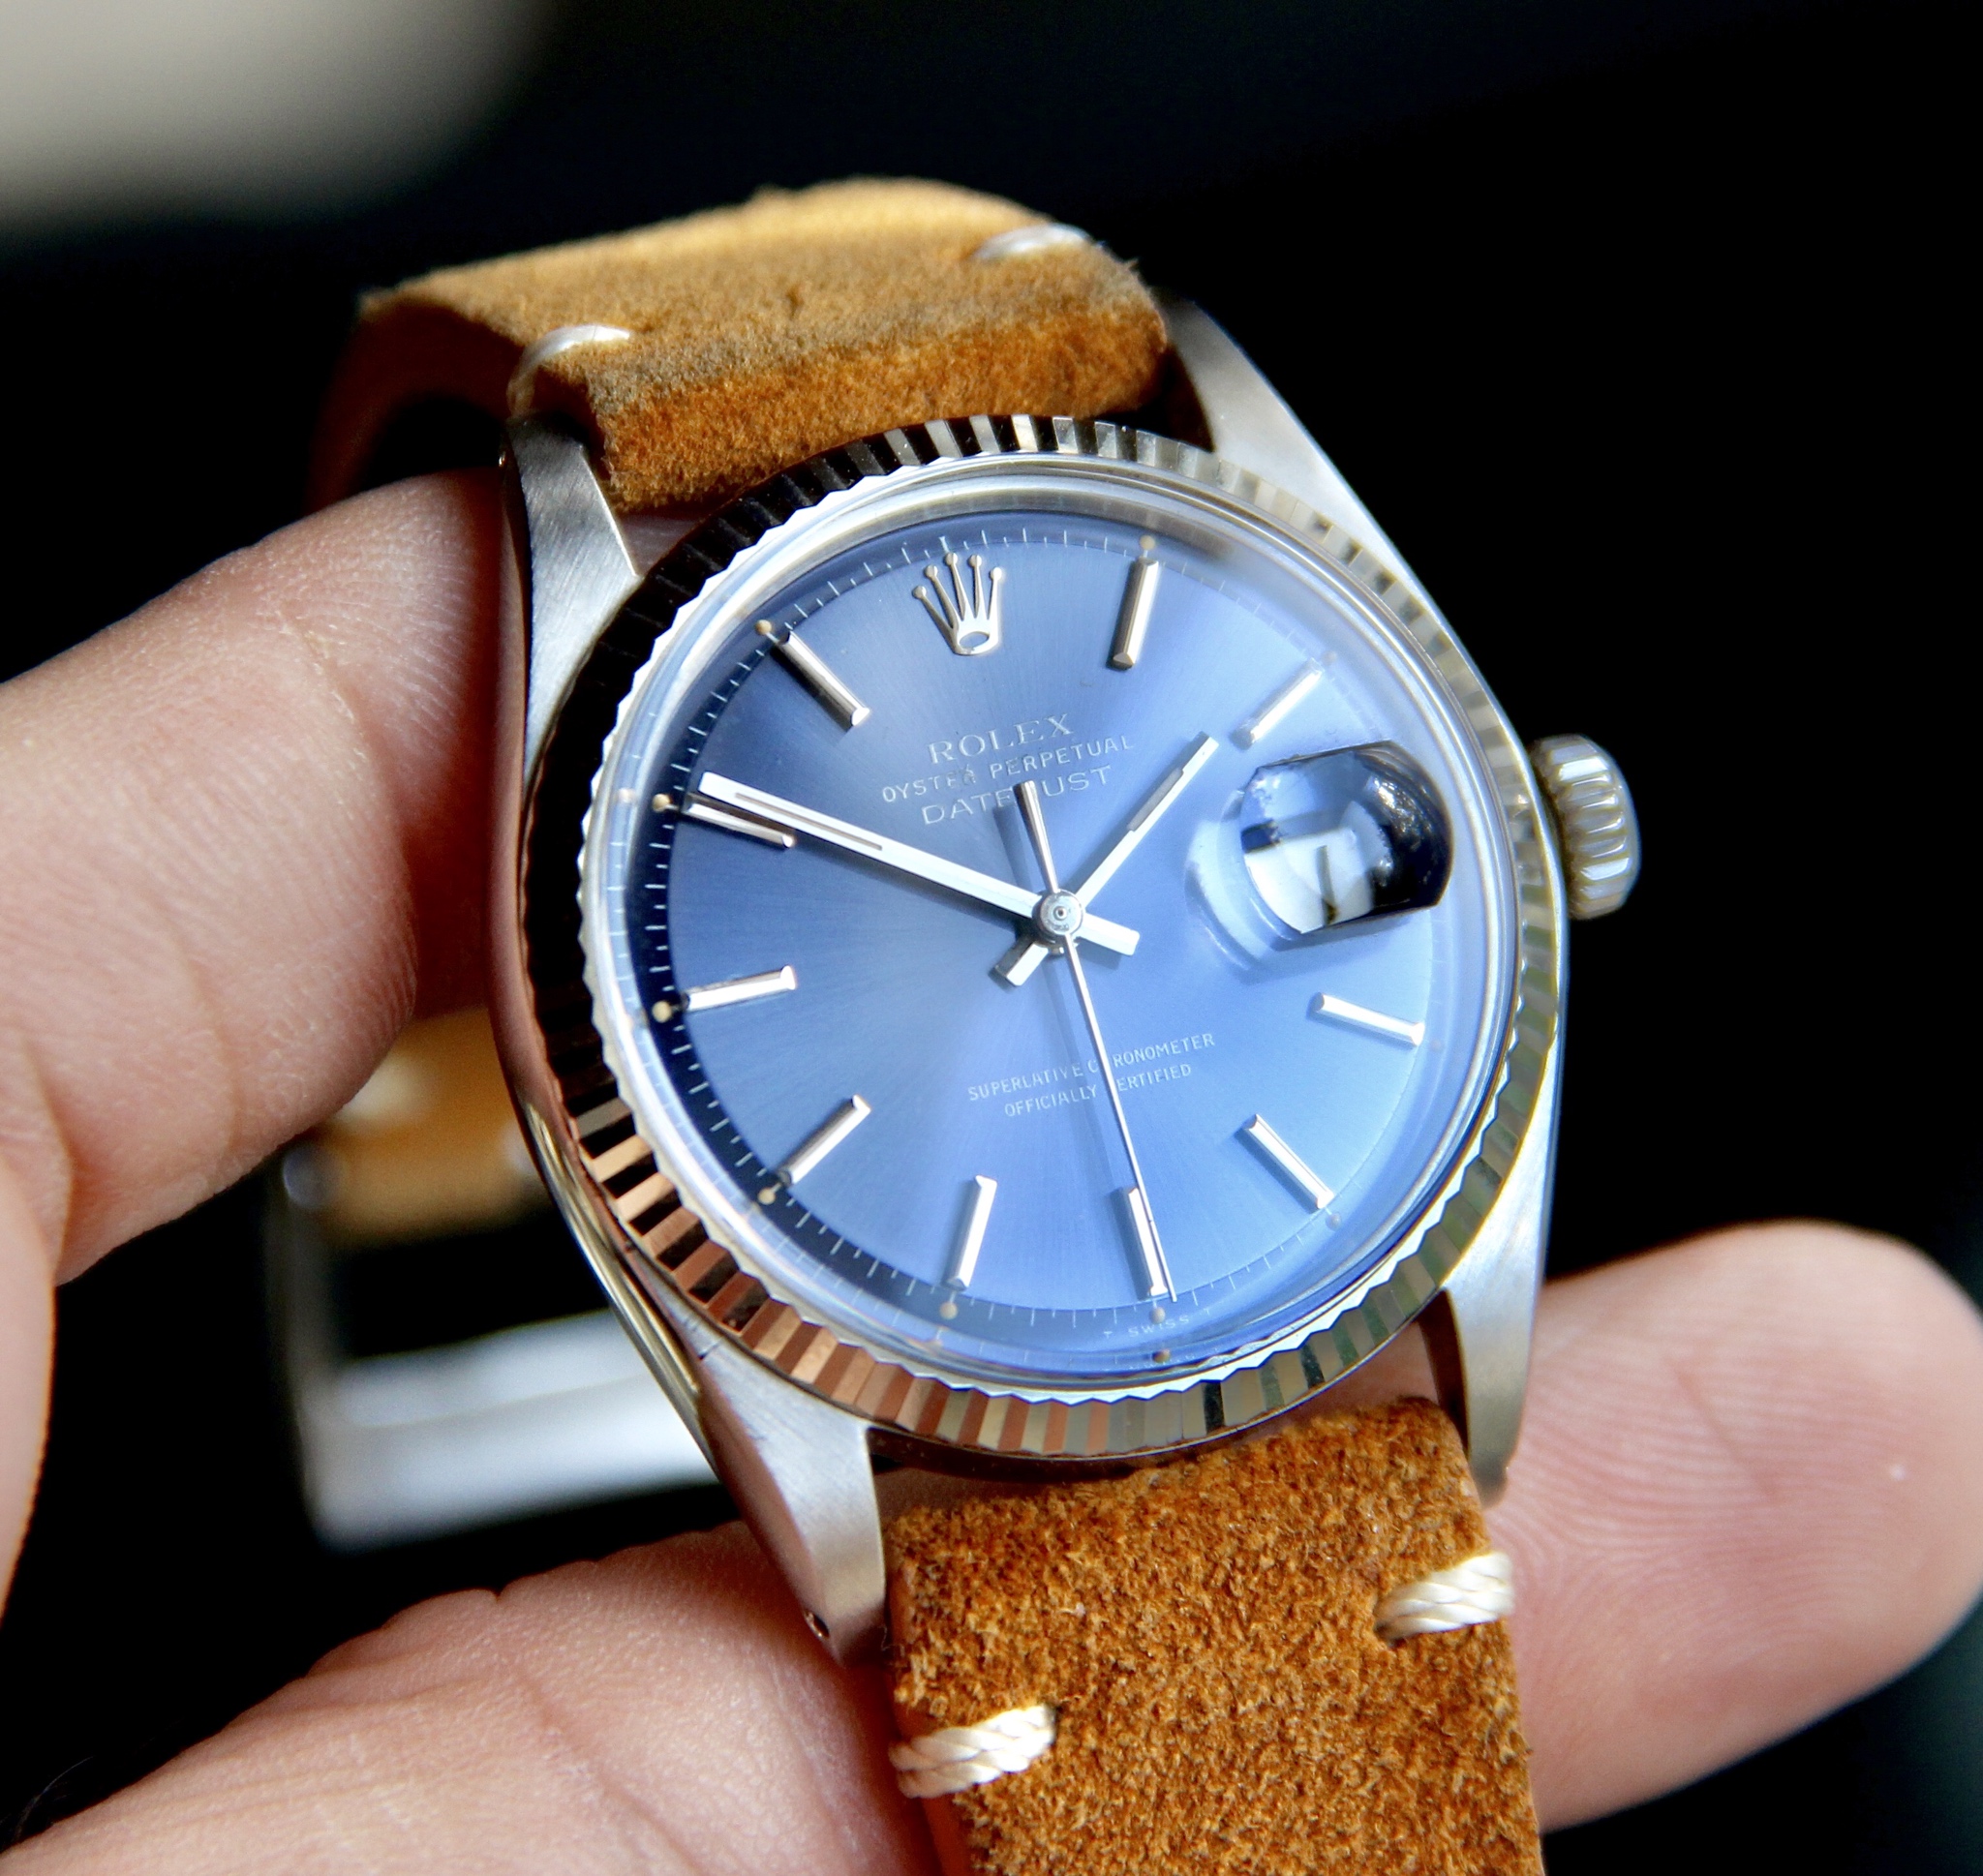 rolex datejust reference 1601